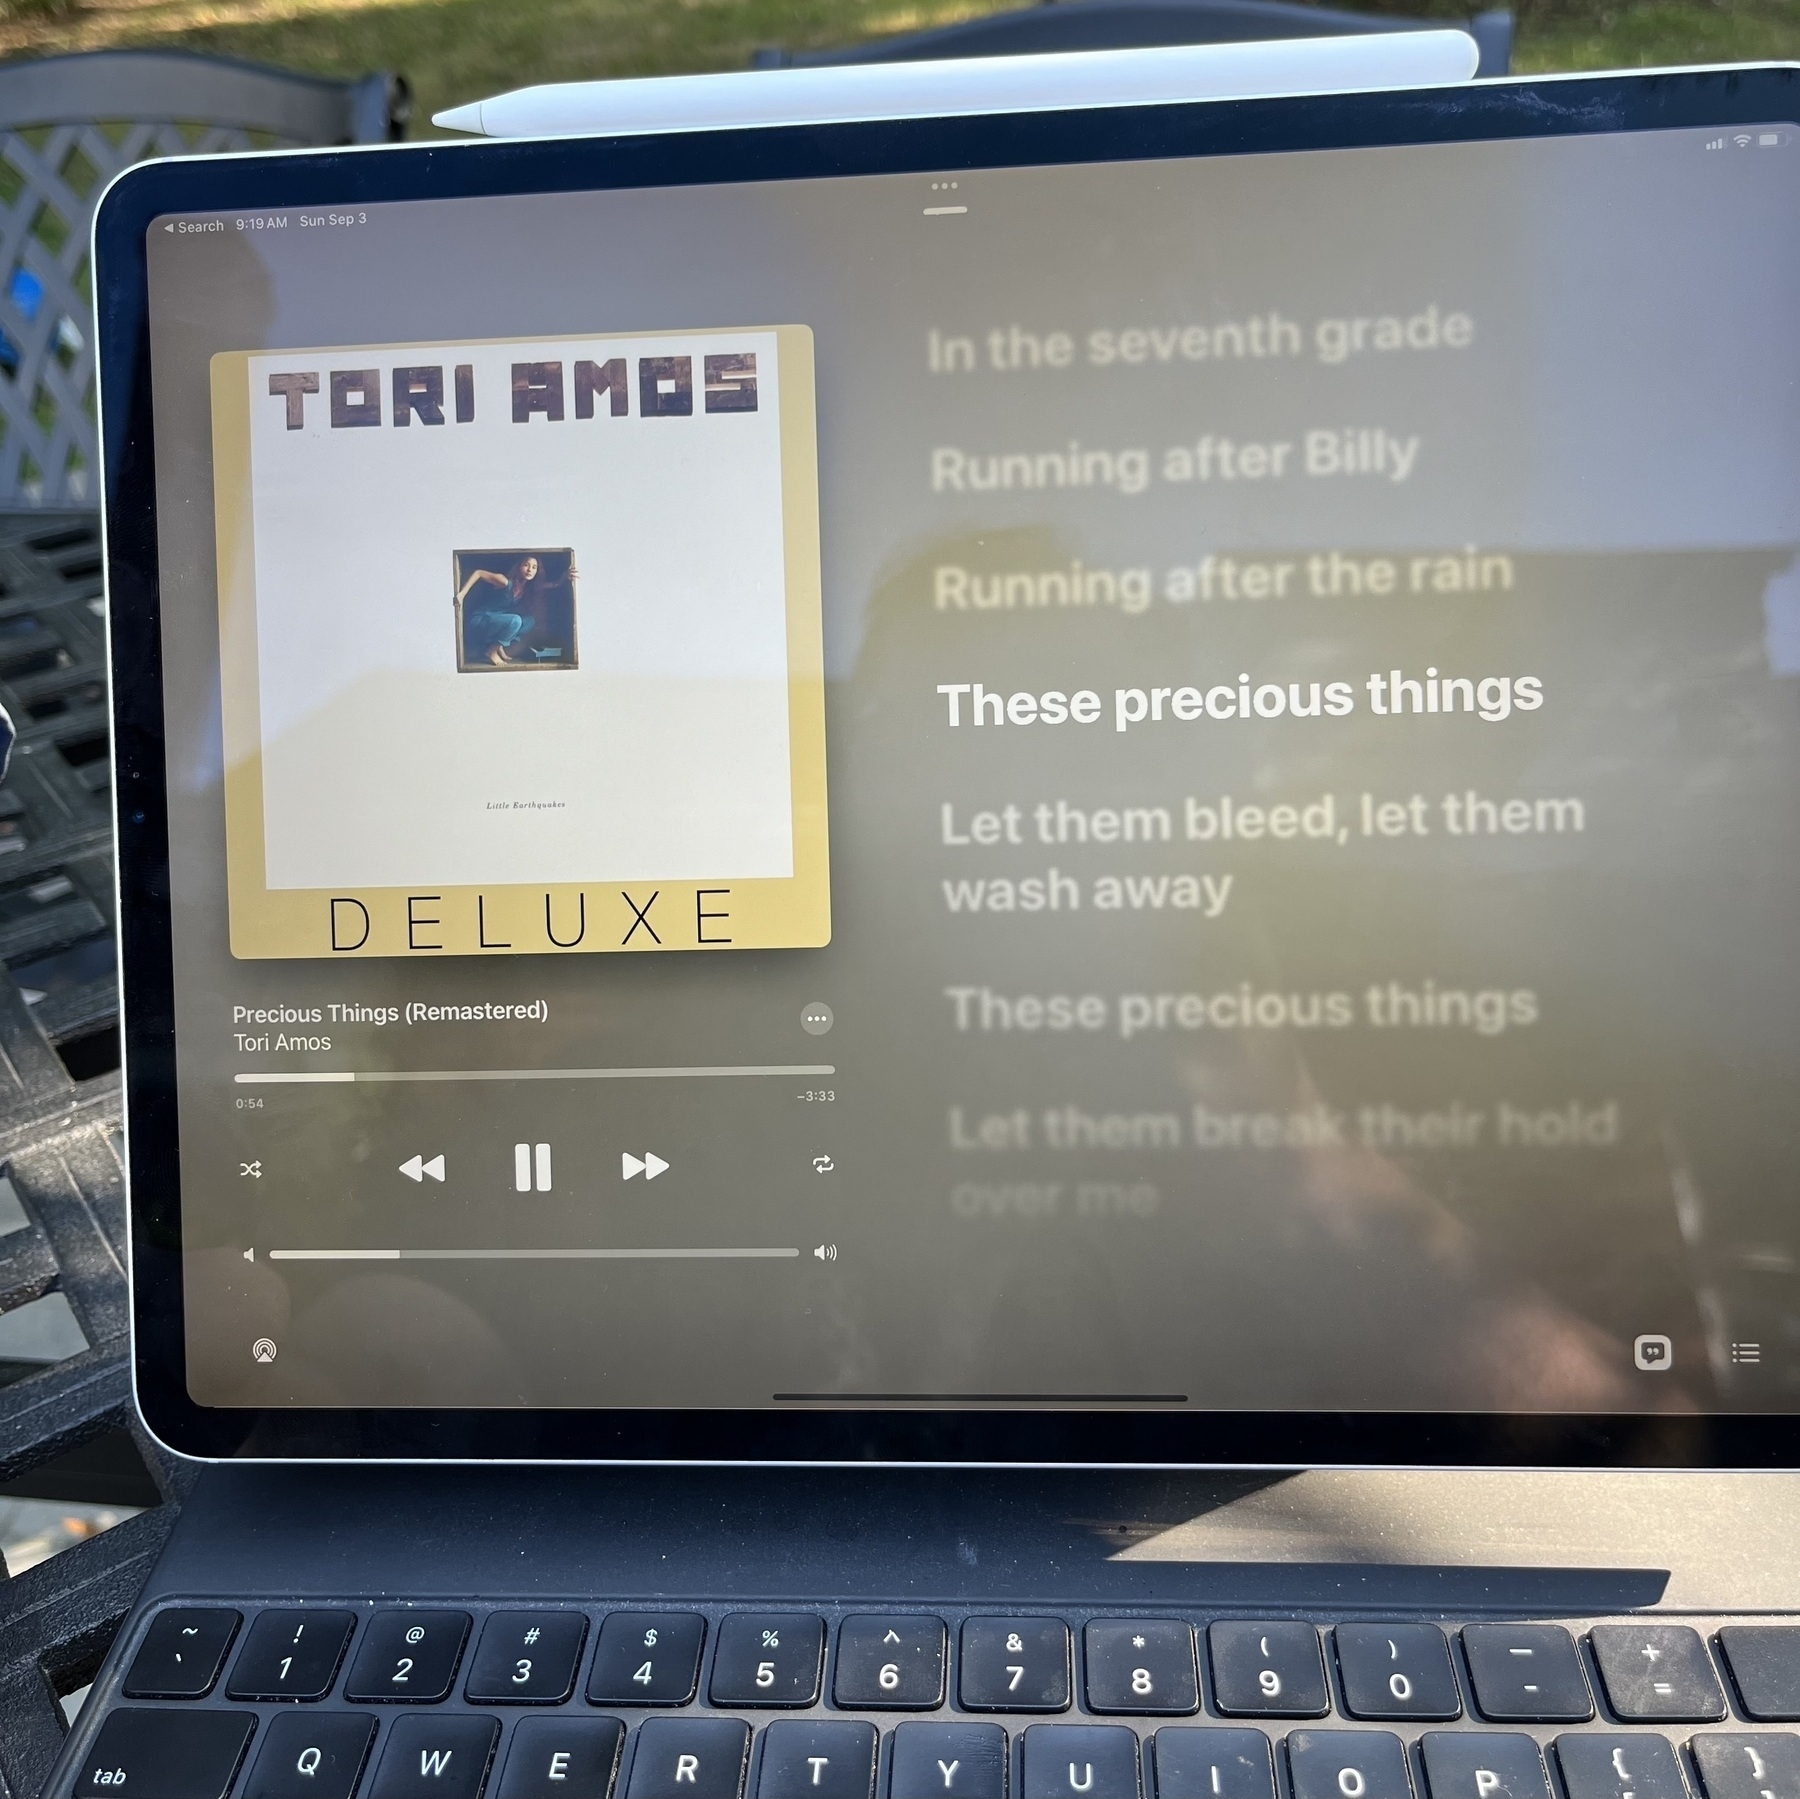 An iPad Pro attached to a Magic Keyboard with an Apple Pencil 2 on top displaying the Music app playing Precious Things from the Tori Amos album Little Earthquakes. The album art is displayed on the left, with Music.app’s controls and the lyrics are displayed on the right with the line “These precious things” highlighted.